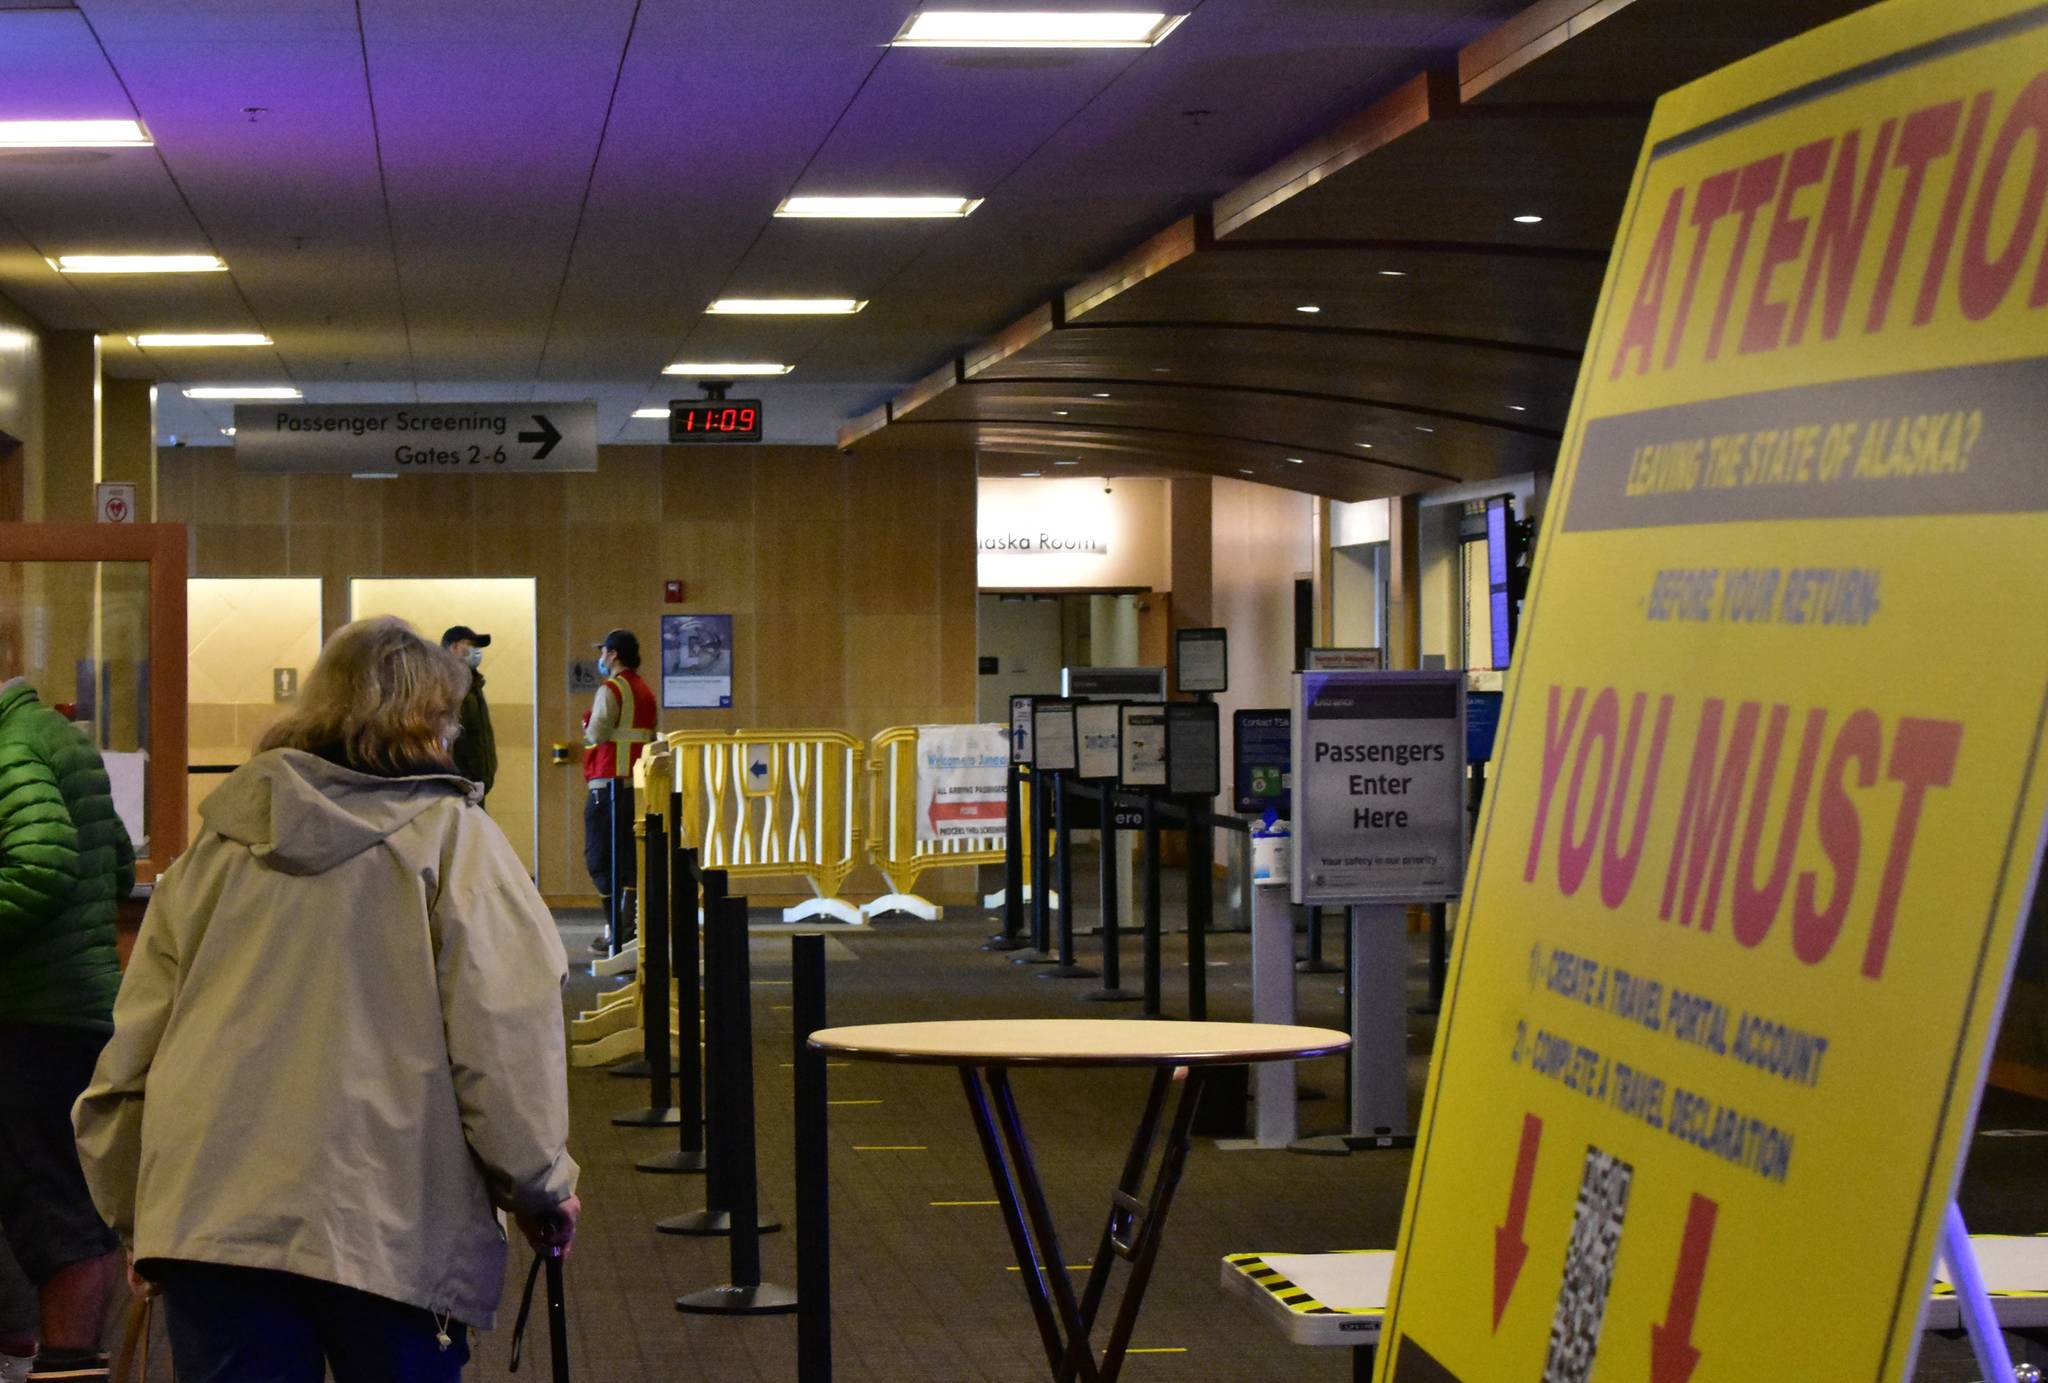 Passengers at the Juneau International Airport make their way past signage notifying the public about the state’s travel restrictions on Monday, Nov. 15, 2020. Alaska Department of Health and Social Services released a request for information seeking to determine interest among potential contractors to provide a one-dose vaccine to interested travelers in a secure section of the airports in Anchorage, Juneau, Fairbanks and Ketchikan. (Peter Segall / Juneau Empire File)